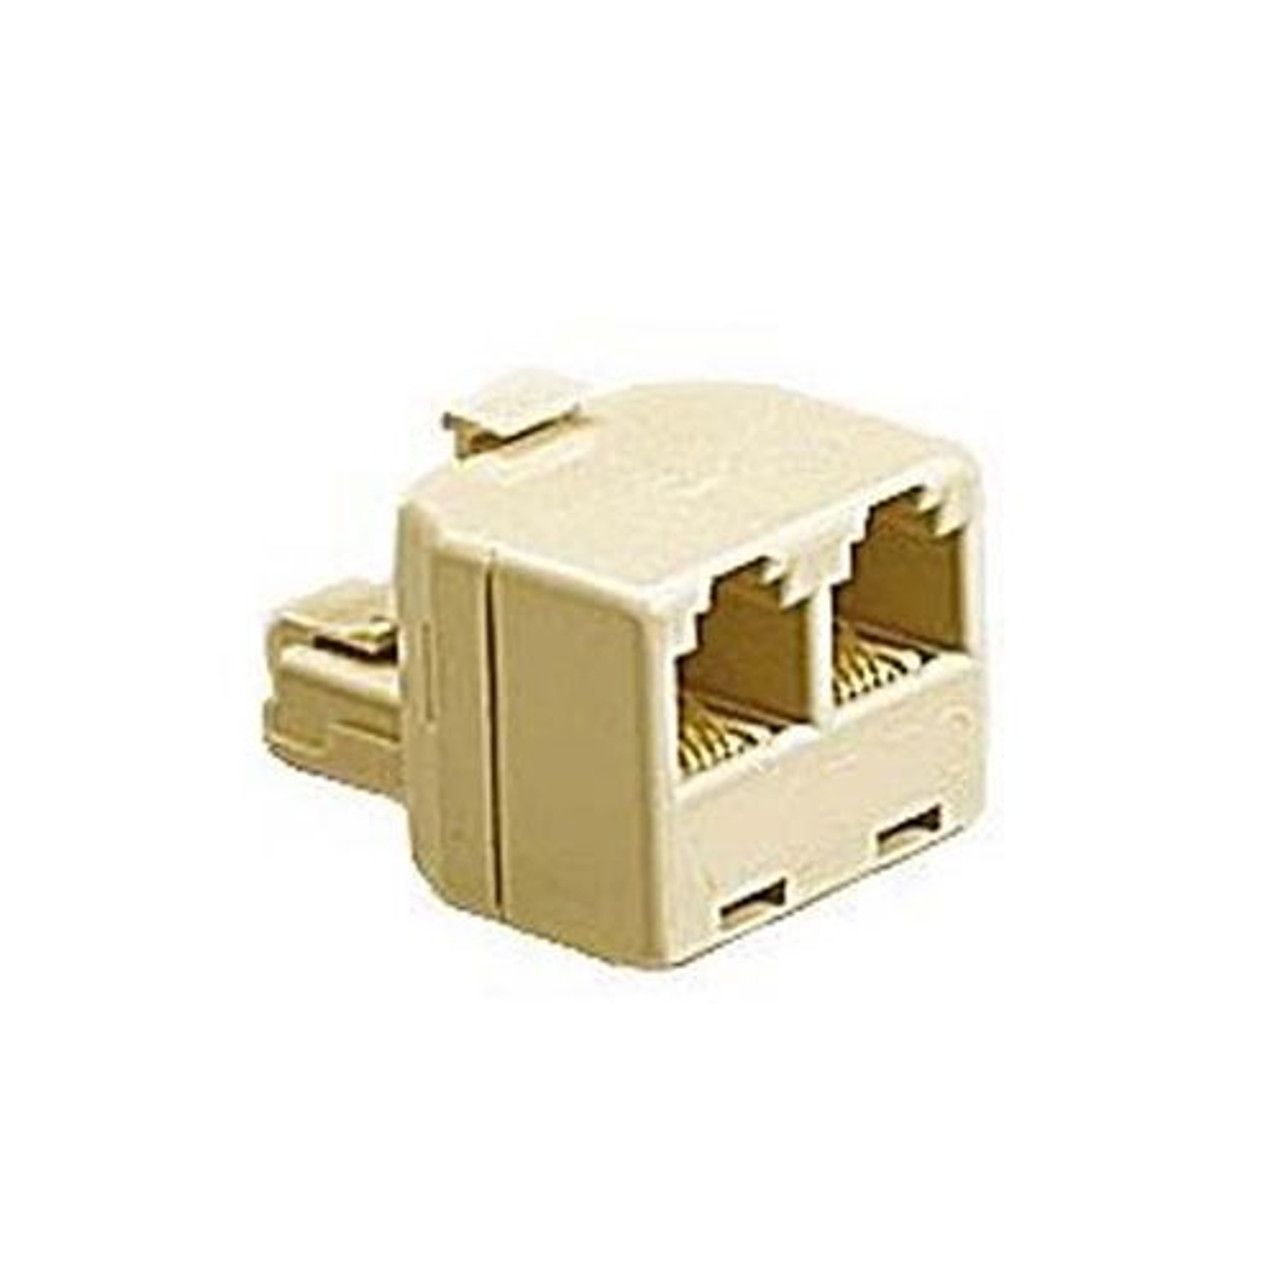 Eagle Phone T Adapter Ivory GP4C RJ11 Two Phone Splitter Jack Male to 2 RJ-11 Female Modular Splitter Line 2 Way Dual Jack Plug Audio Data Signal Cable Connector Outlet Snap-In Component